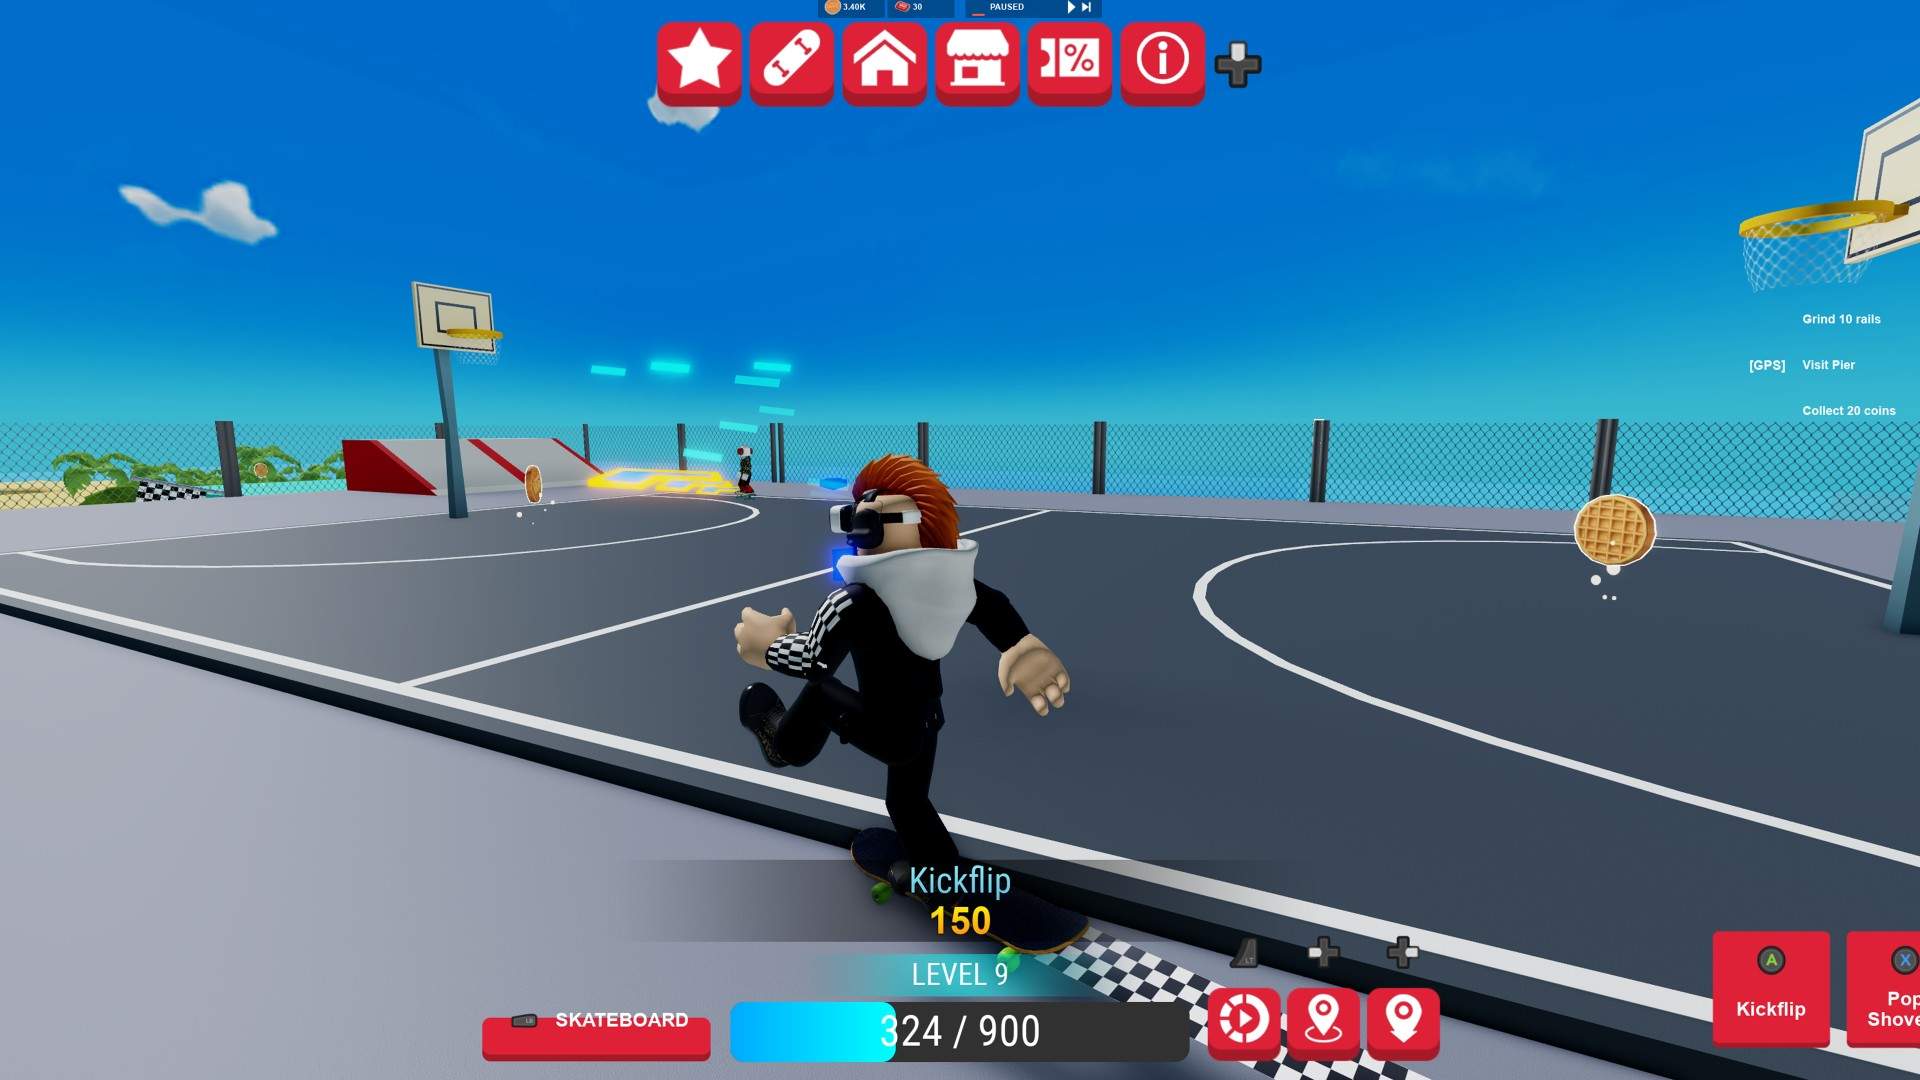 Drop into the Vans World Experience on Roblox